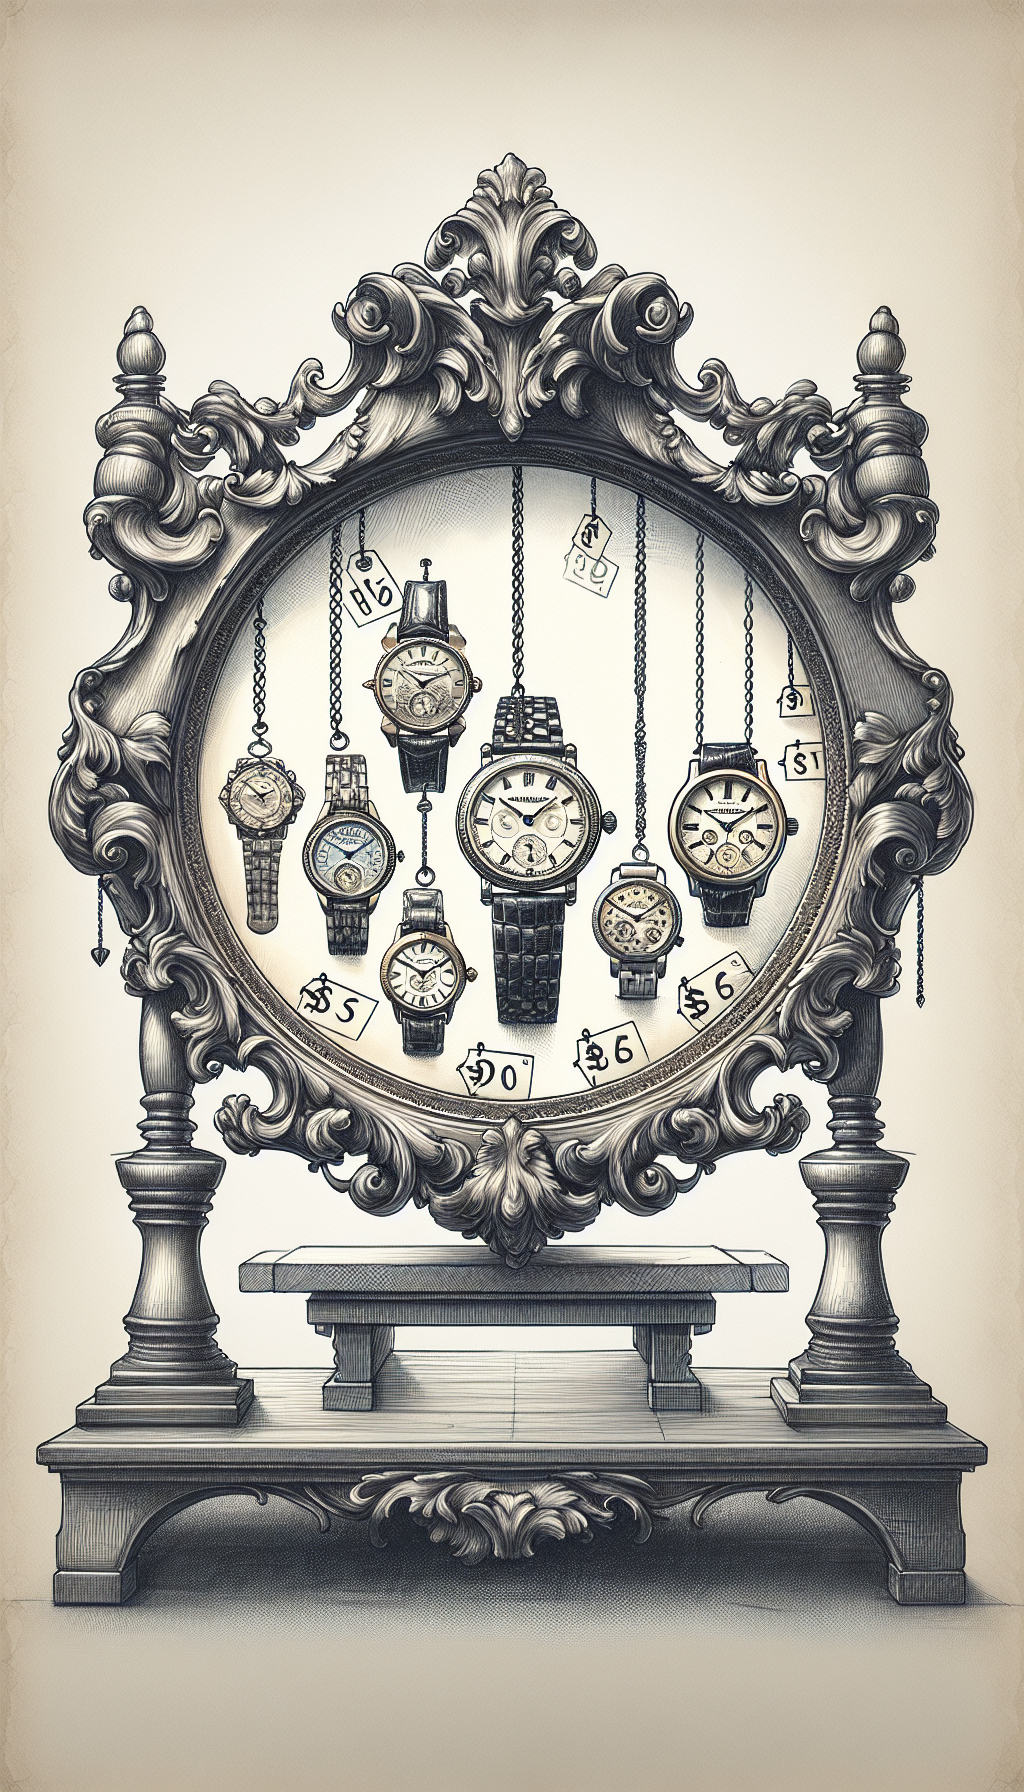 An illustration showcasing a lavish, baroque-style frame, within which a variety of classic Pulsar watch models dangle like charms on a bracelet. The frame sits atop an antique auction pedestal, subtly engraved with ascending dollar values to imply increasing collectibility. Each watch is drawn with a different artistic technique, from watercolor to line art, accenting their timeless elegance and value.